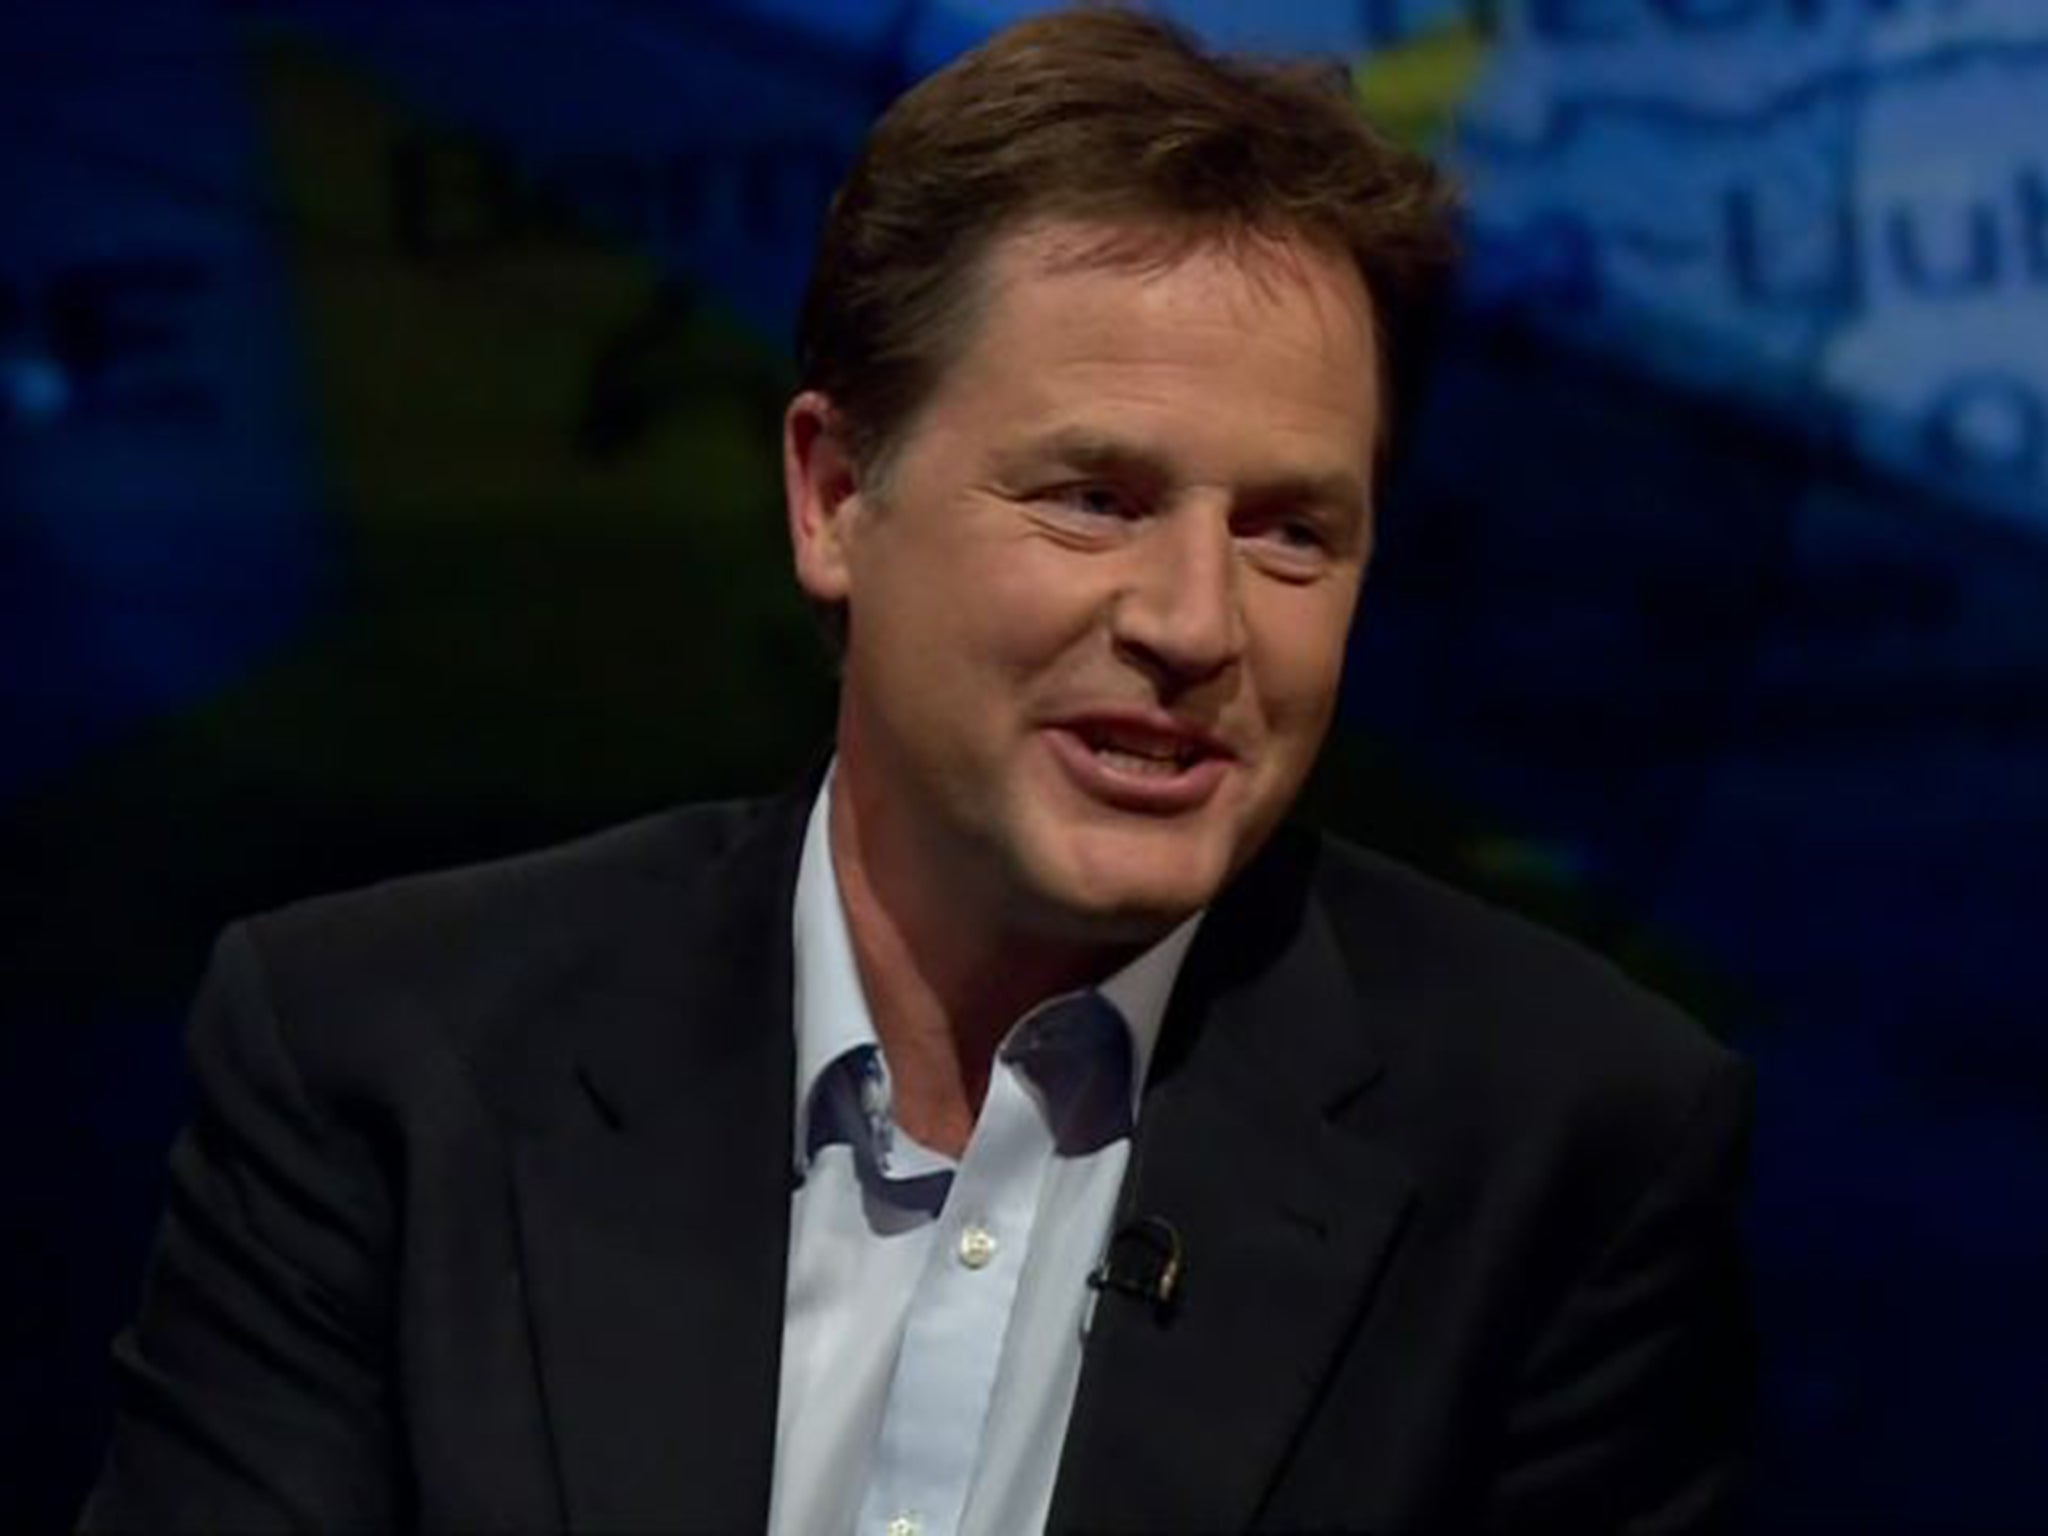 Nick Clegg appearing on BBC's Newsnight earlier this month